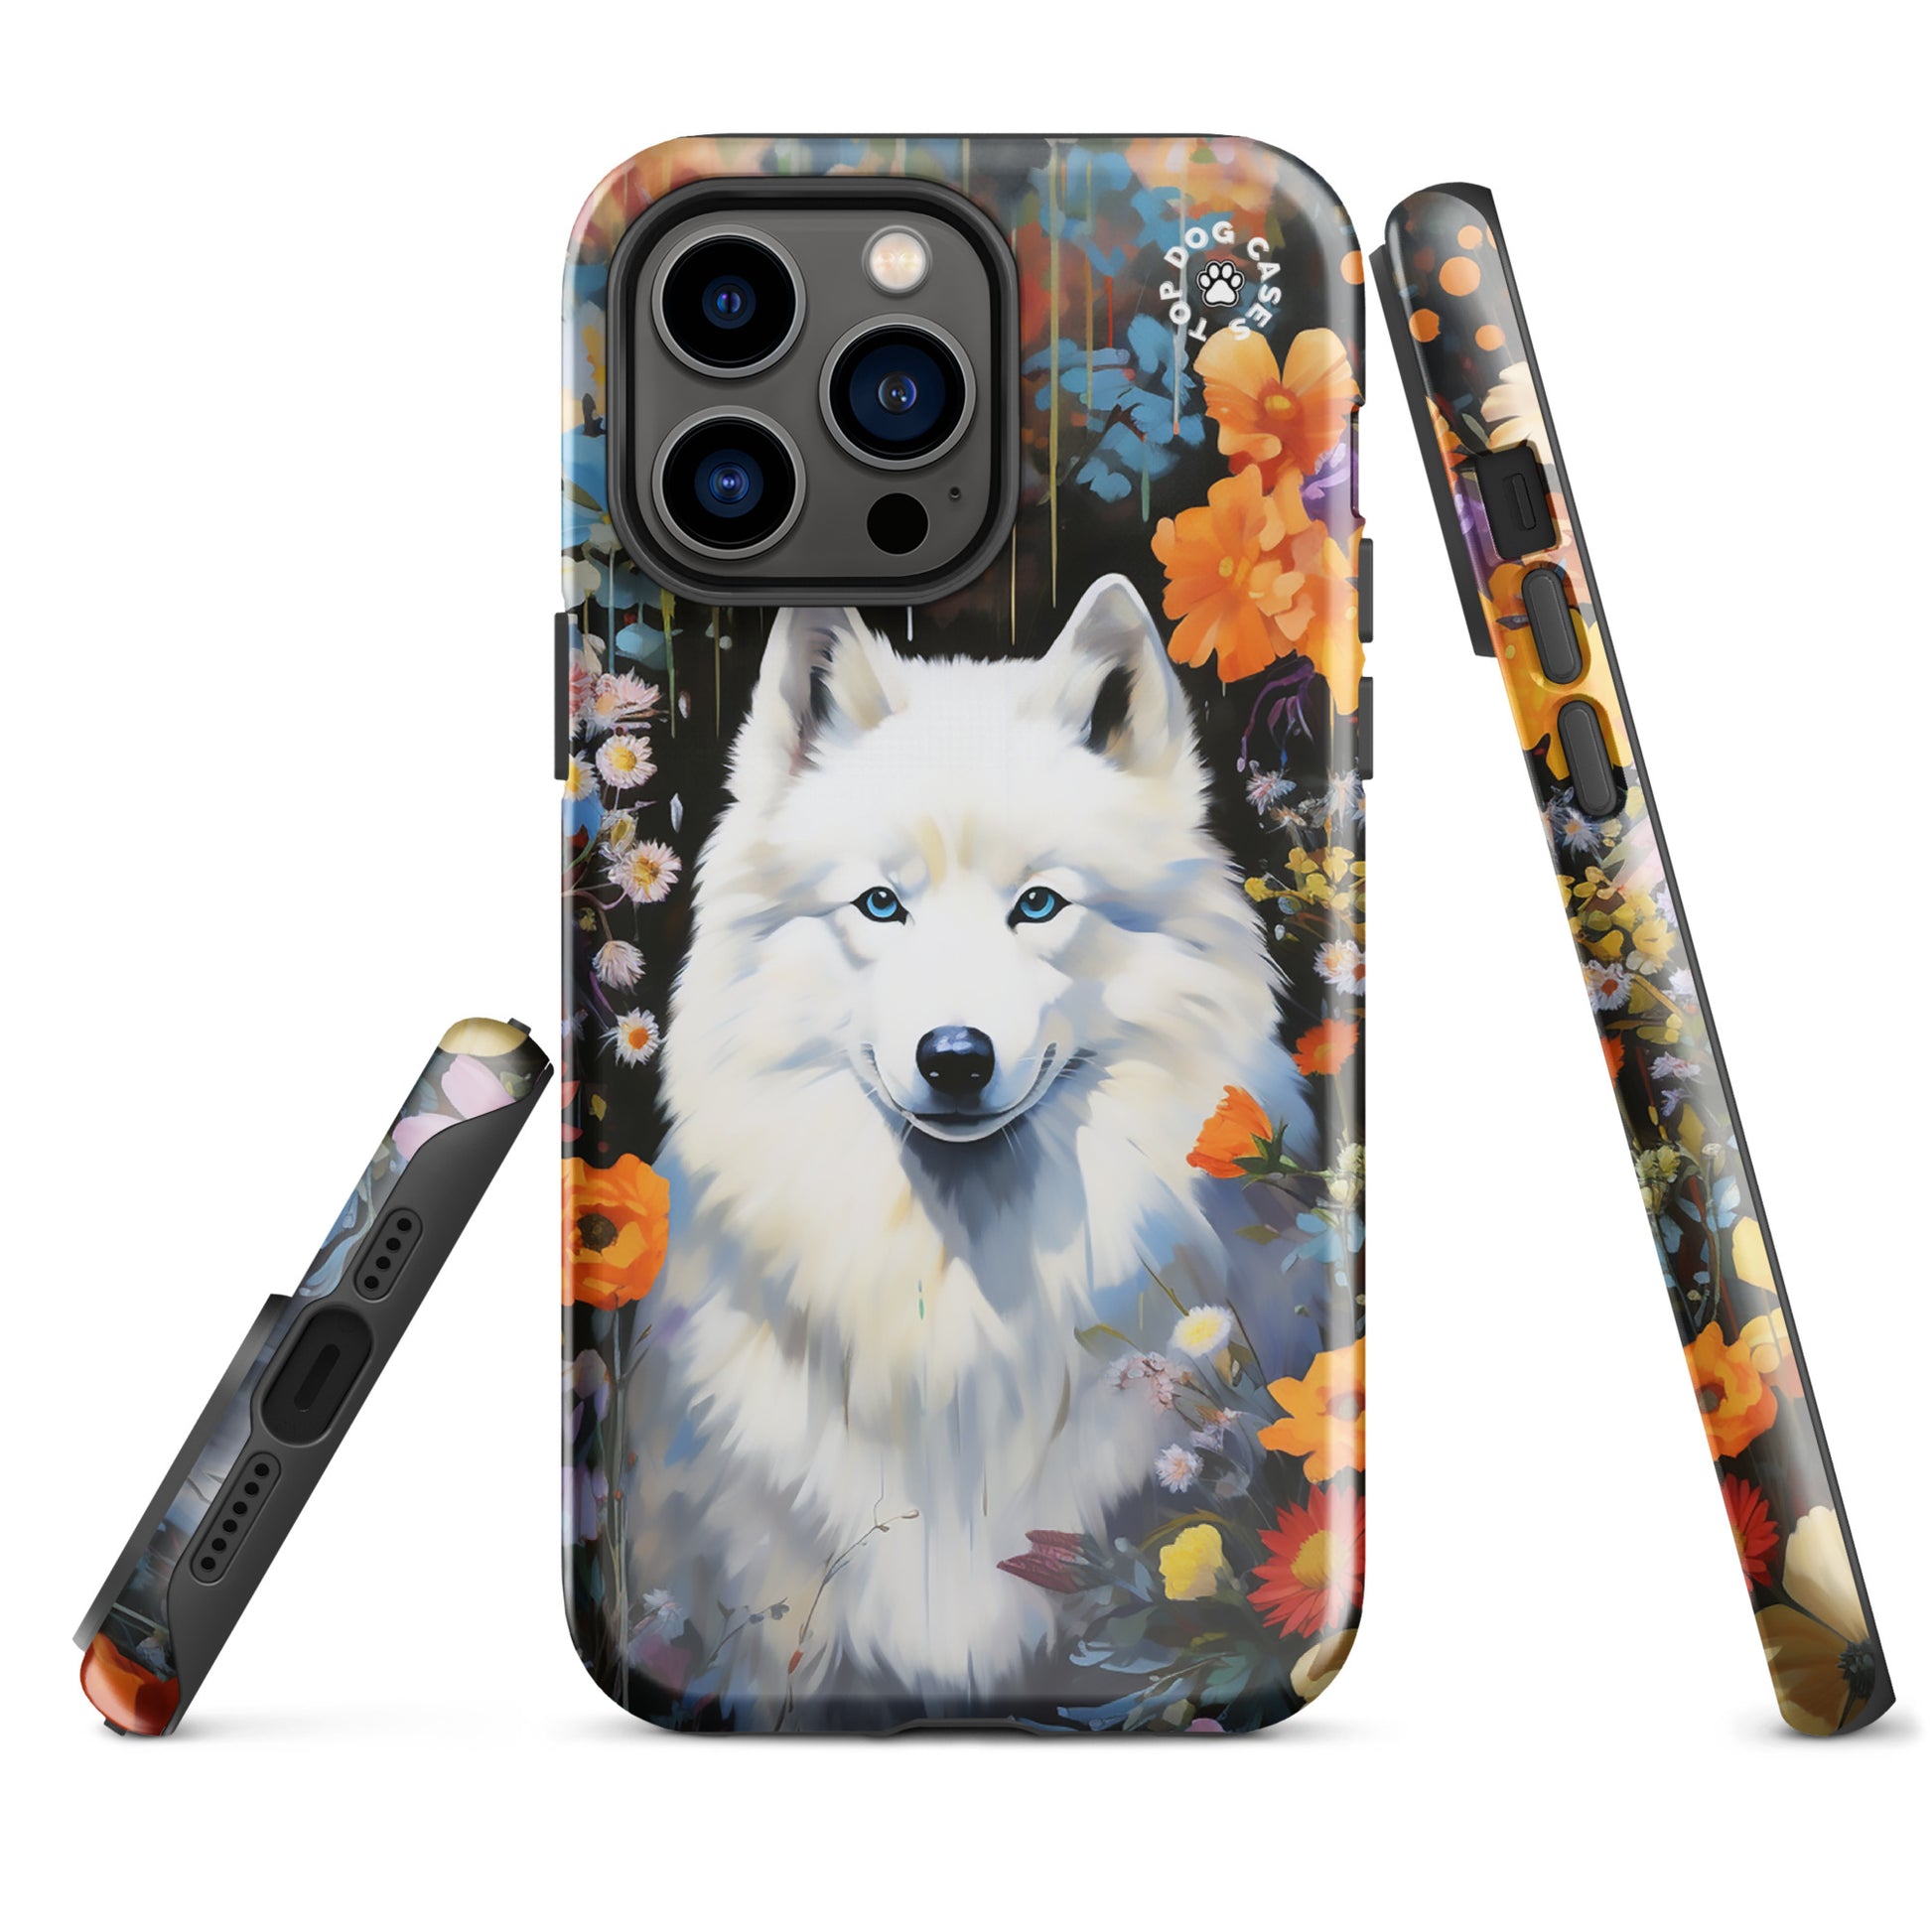 White Siberian Husky Around Flowers Tough Case for iPhone - Top Dog Cases - #CuteDog, #CuteDogs, #Flowers, #Husky, #iPhone, #iPhone11, #iphone11case, #iPhone12, #iPhone12case, #iPhone13, #iPhone13case, #iPhone13DogCase, #iPhone13Mini, #iPhone13Pro, #iPhone13ProMax, #iPhone14, #iPhone14case, #iPhone14DogCase, #iPhone14Plus, #iPhone14Pluscase, #iPhone14Pro, #iPhone14ProMax, #iPhone14ProMaxCase, #iPhone15, #iPhone15case, #iPhonecase, #iphonedogcase, #Siberian Husky, #White Siberian Husky, DogsandFlowers